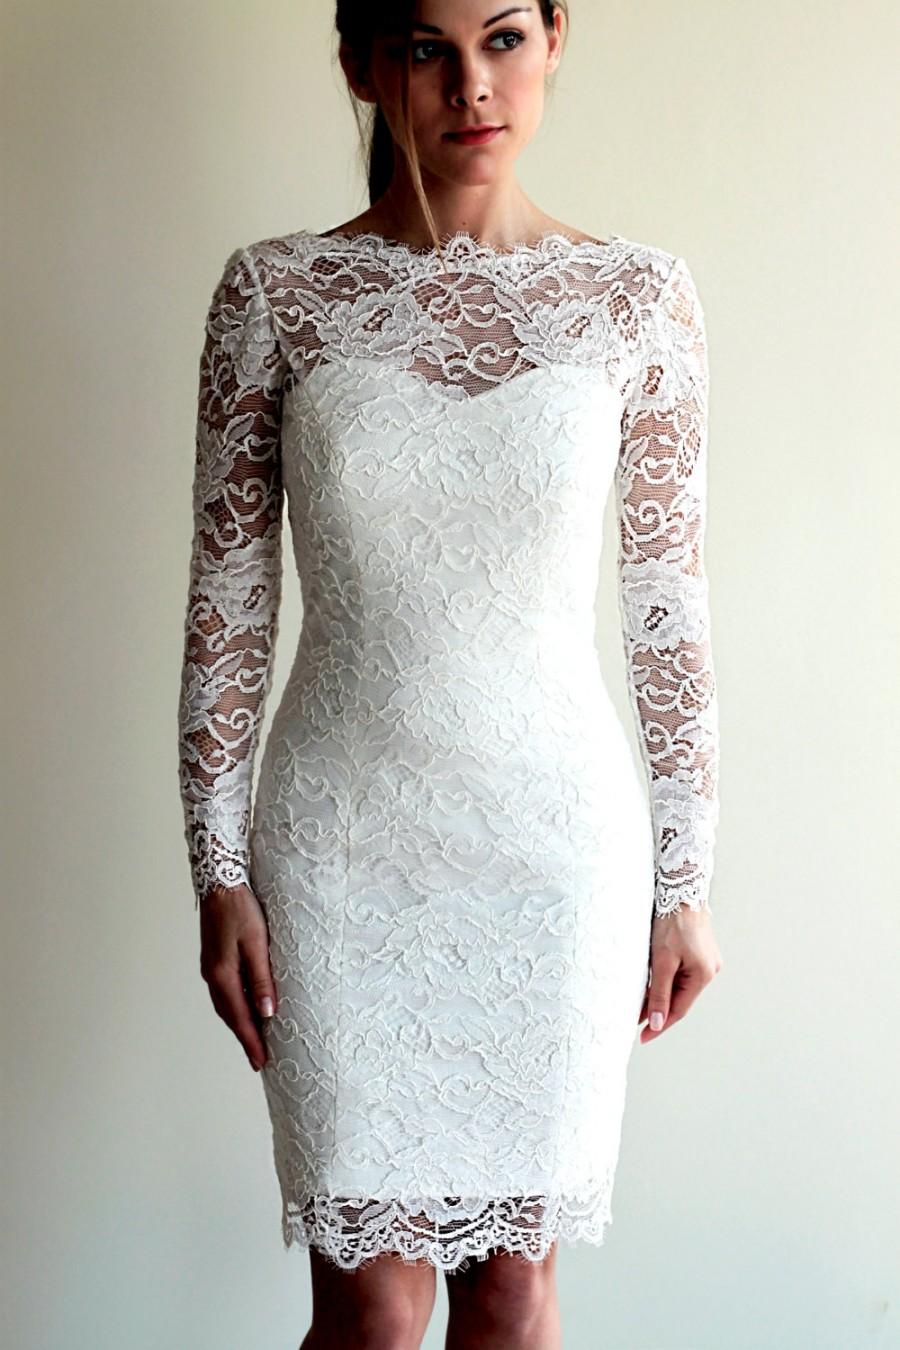 Mariage - Short Wedding Dress with Sleeves and Illusion Neckline and Illusion Back, Reception Lace Dress, See-through Lace Dress